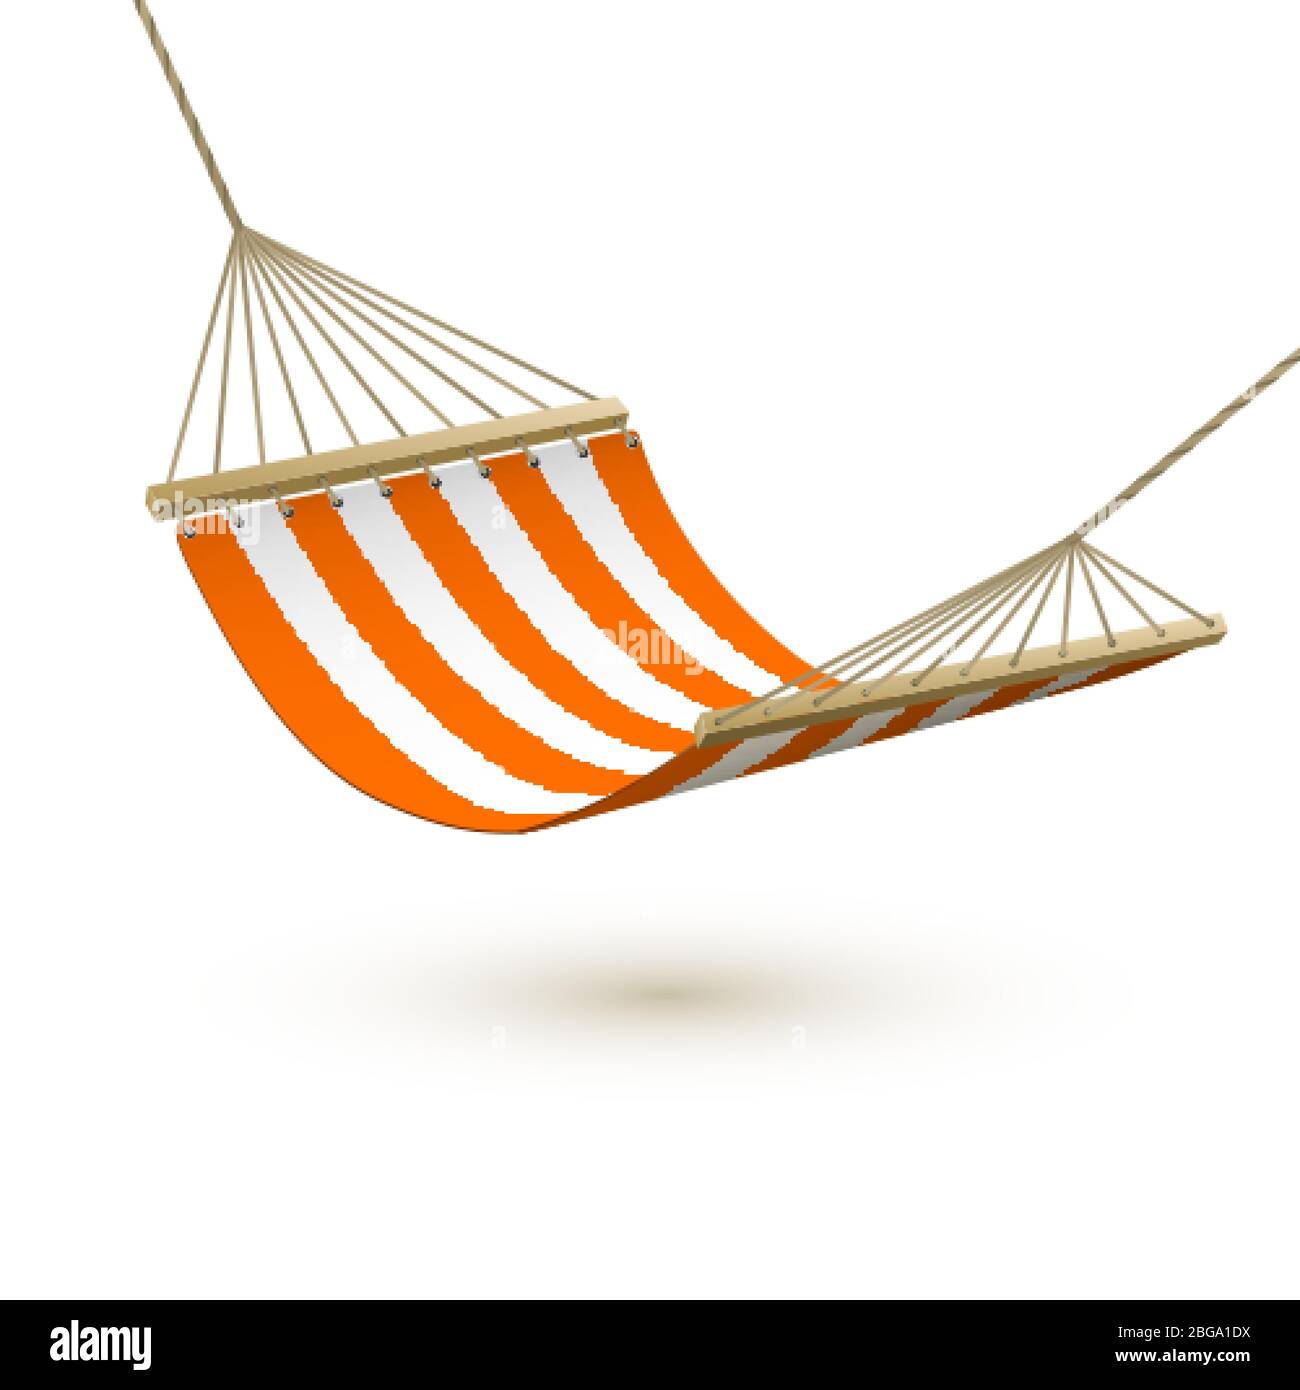 Hammock template. Red and white striped hammock. Camping or picnic relaxation. Tourism or vacation concept. Vector illustration Stock Vector